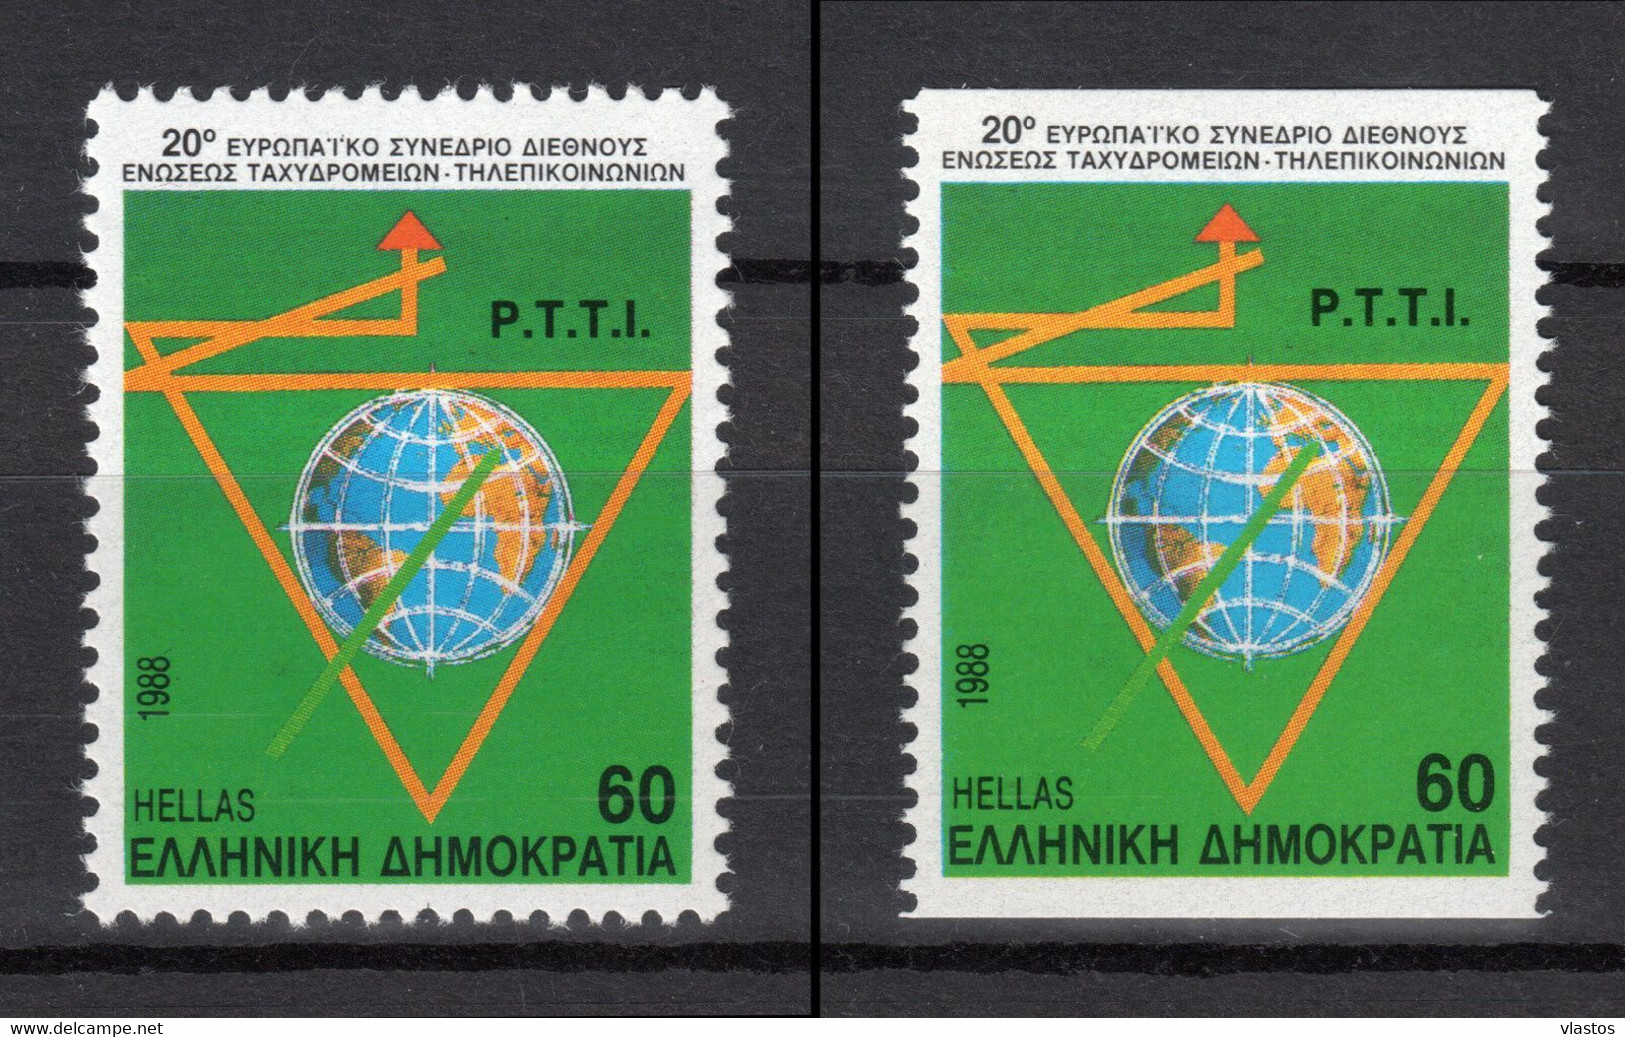 GREECE 1988 COMPLETE YEAR - PERFORATED+IMPERFORATED STAMPS MNH